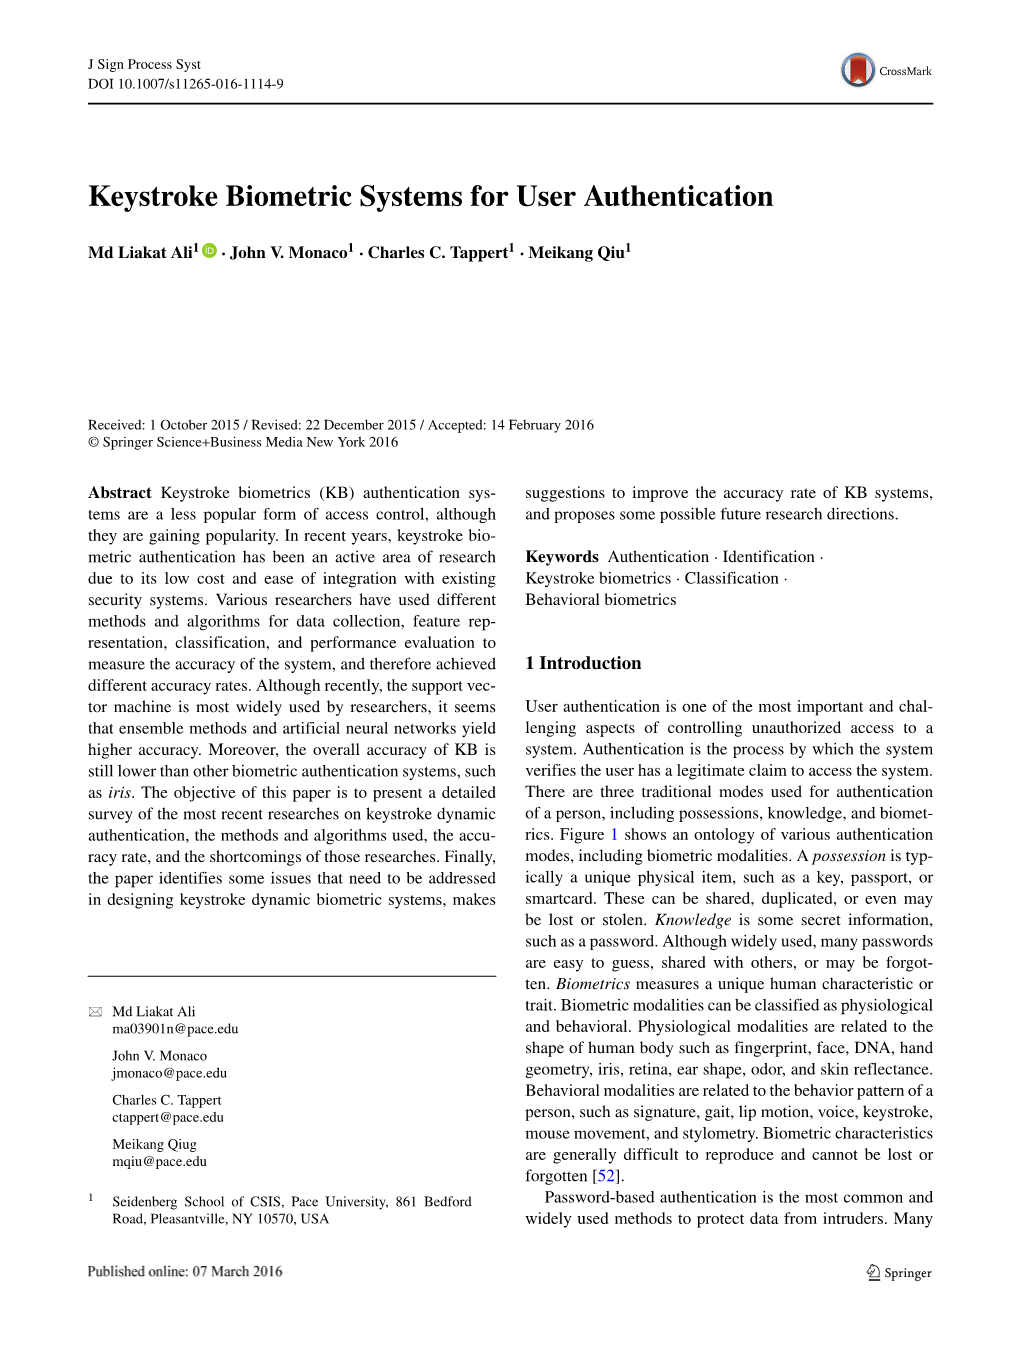 Keystroke Biometric Systems for User Authentication